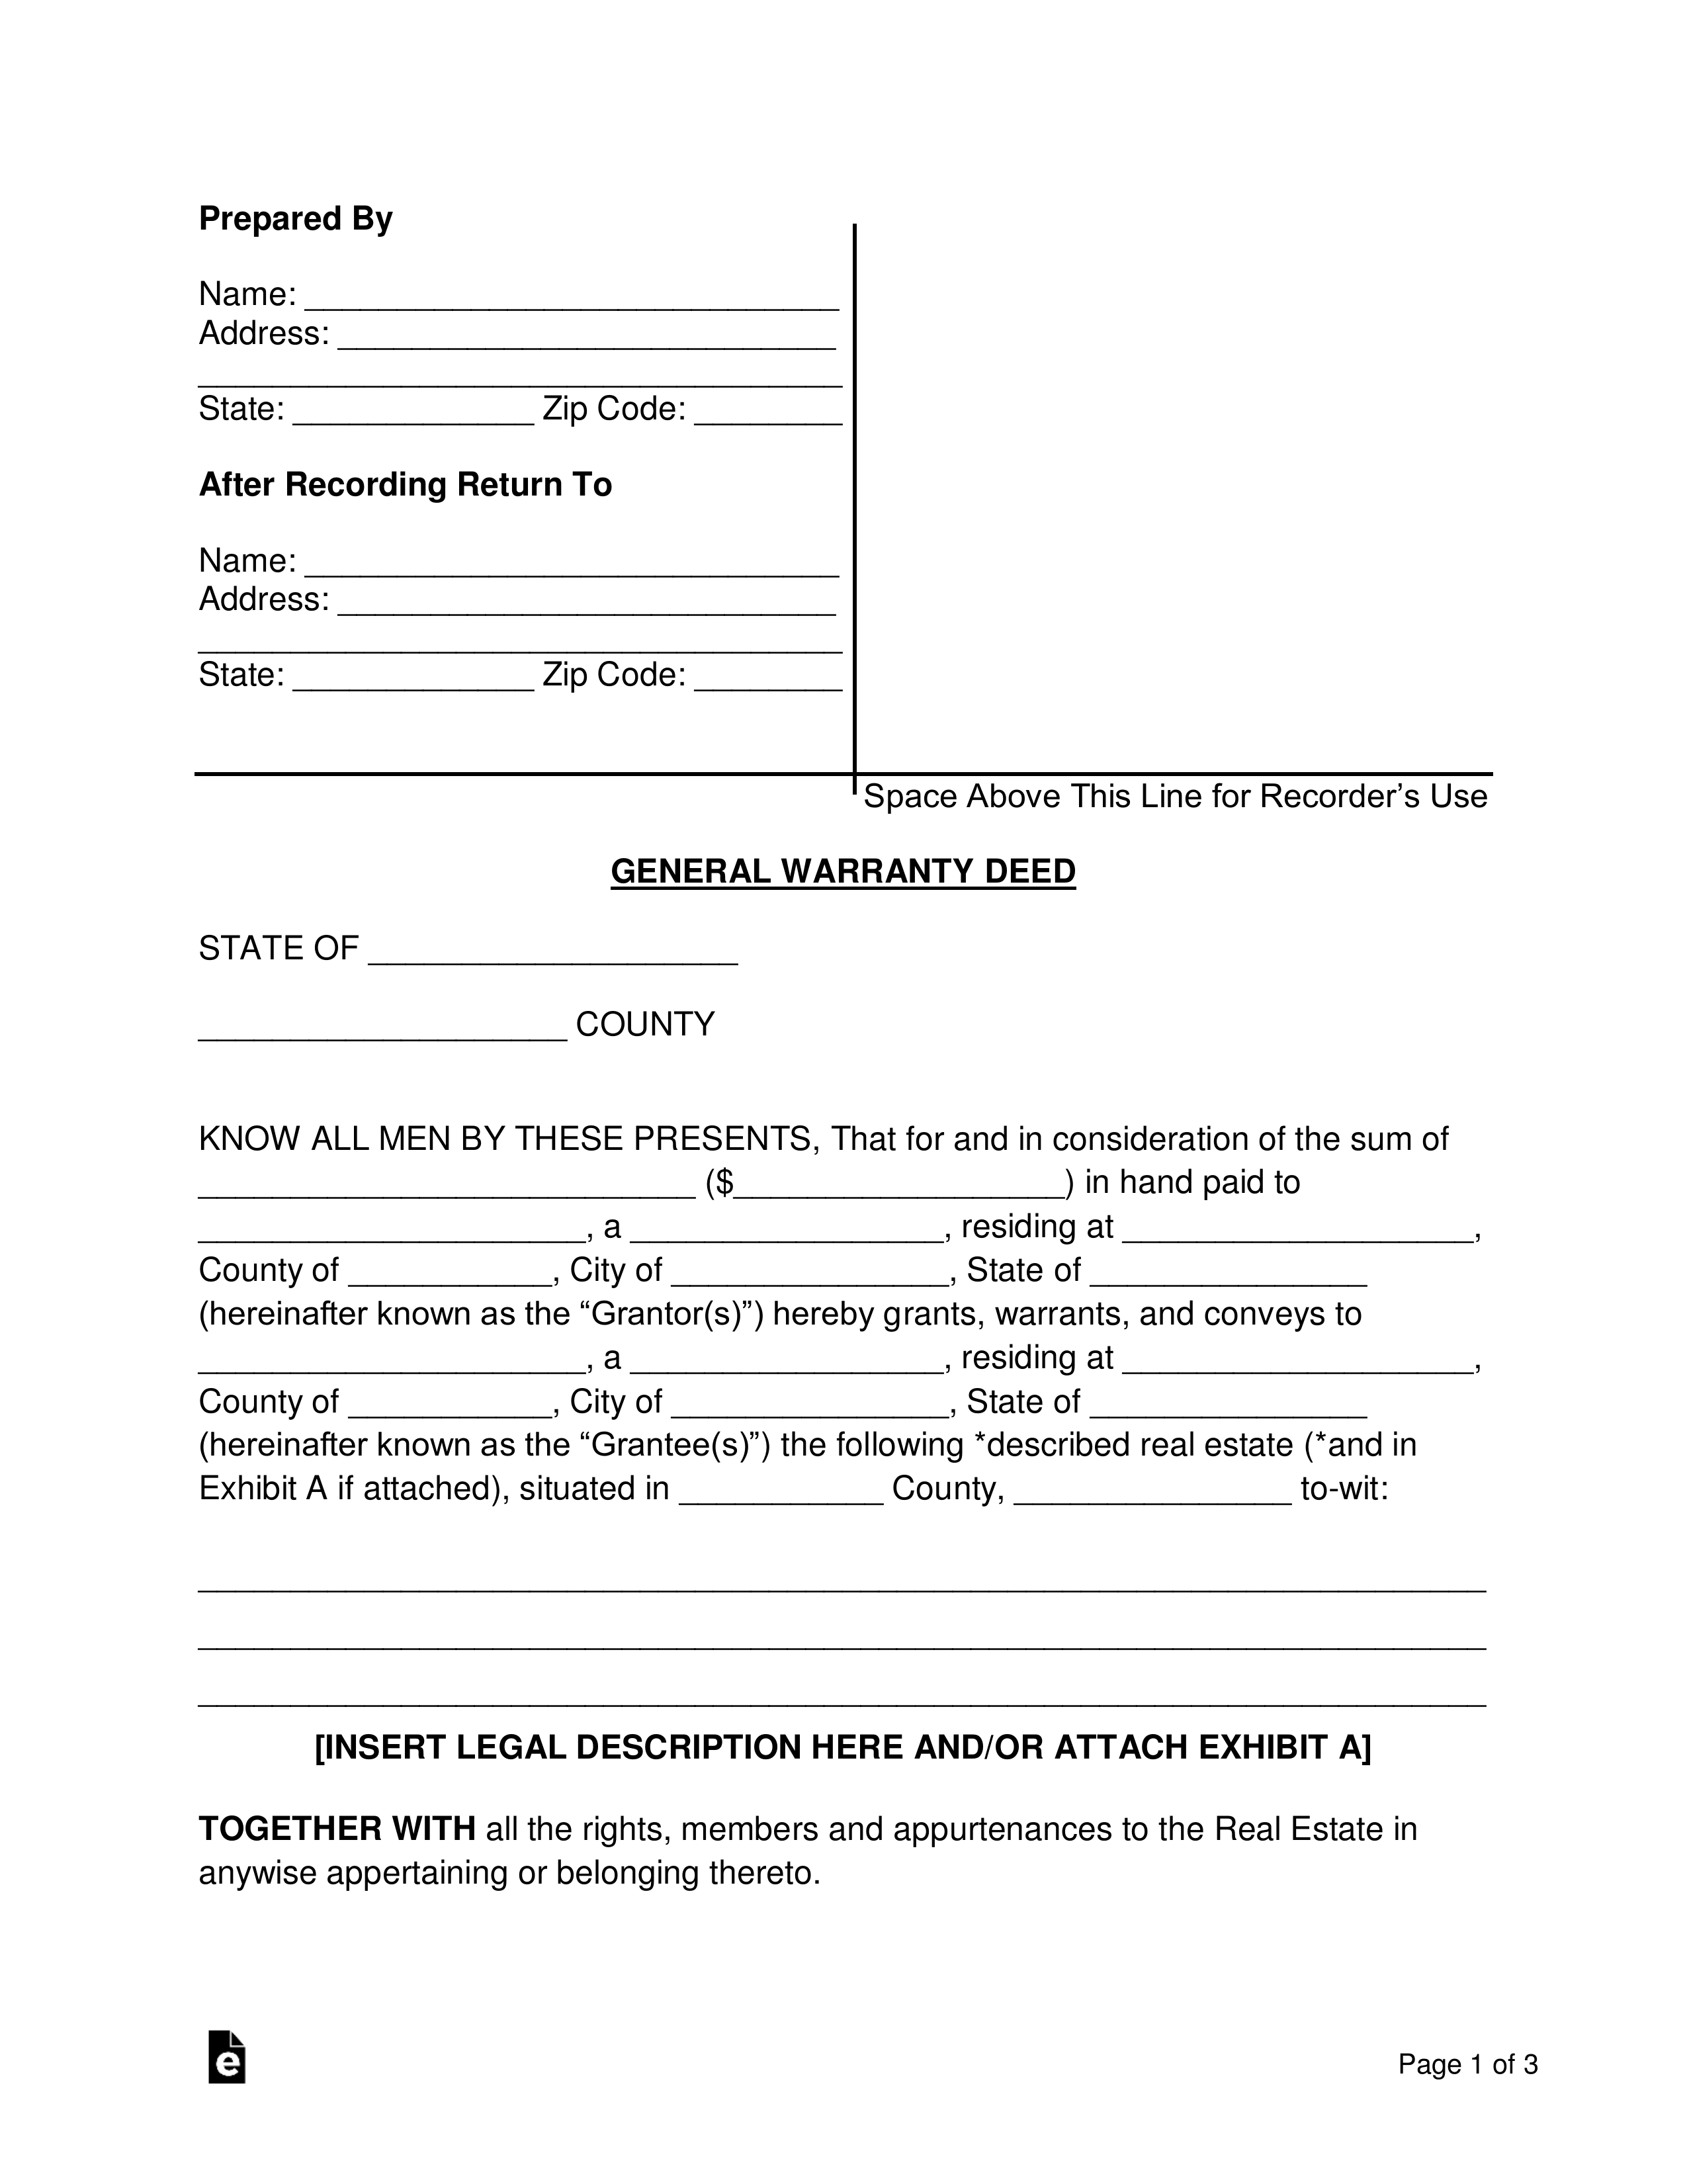 printable-warranty-deed-tutore-org-master-of-documents